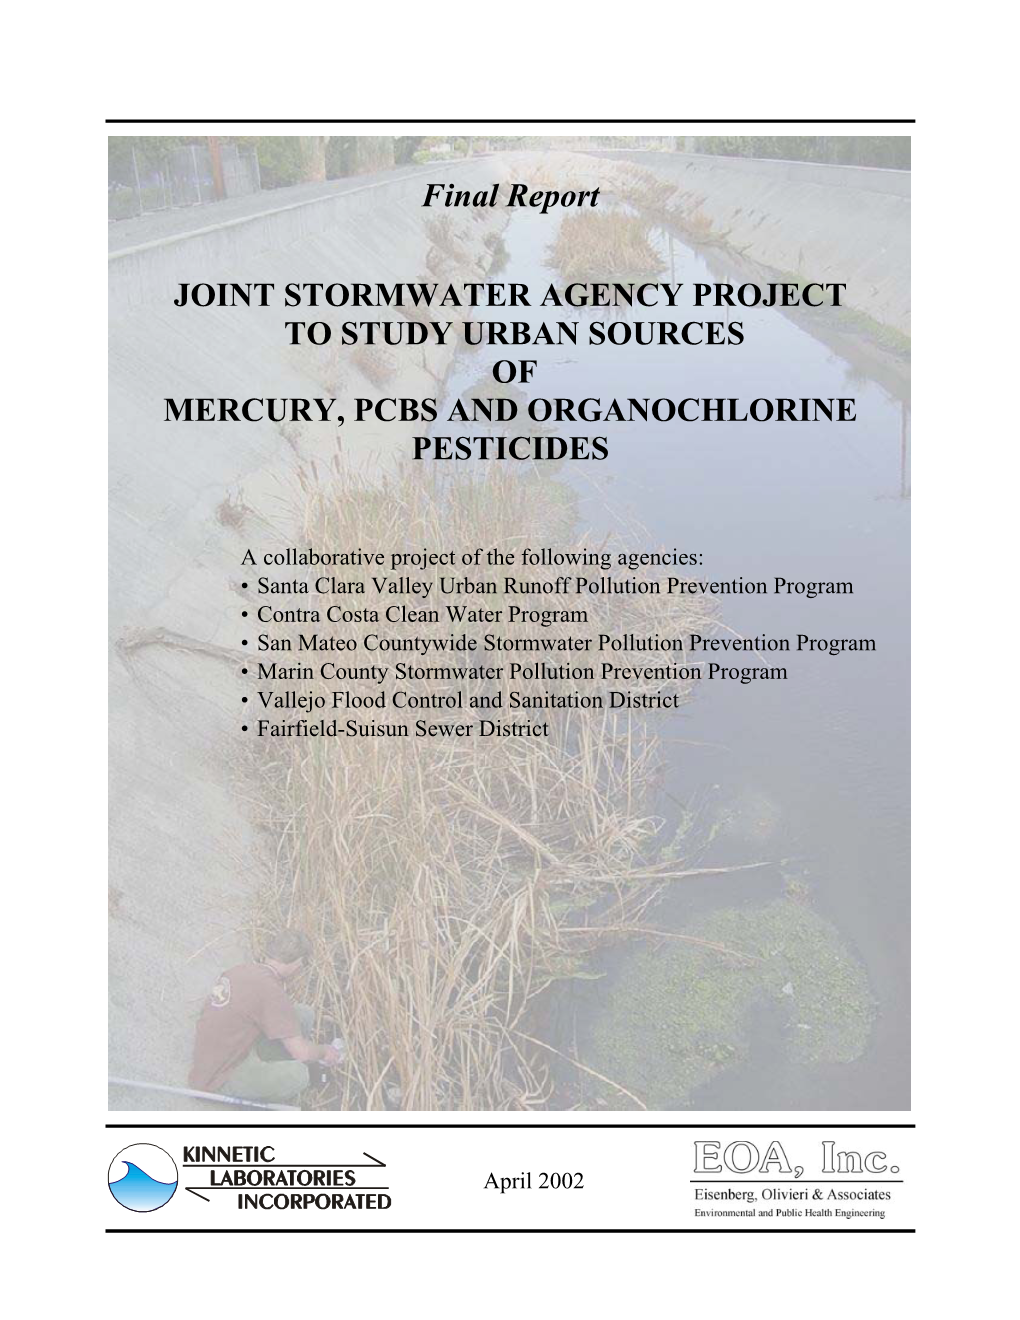 Final Report JOINT STORMWATER AGENCY PROJECT to STUDY URBAN SOURCES of MERCURY, PCBS and ORGANOCHLORINE PESTICIDES